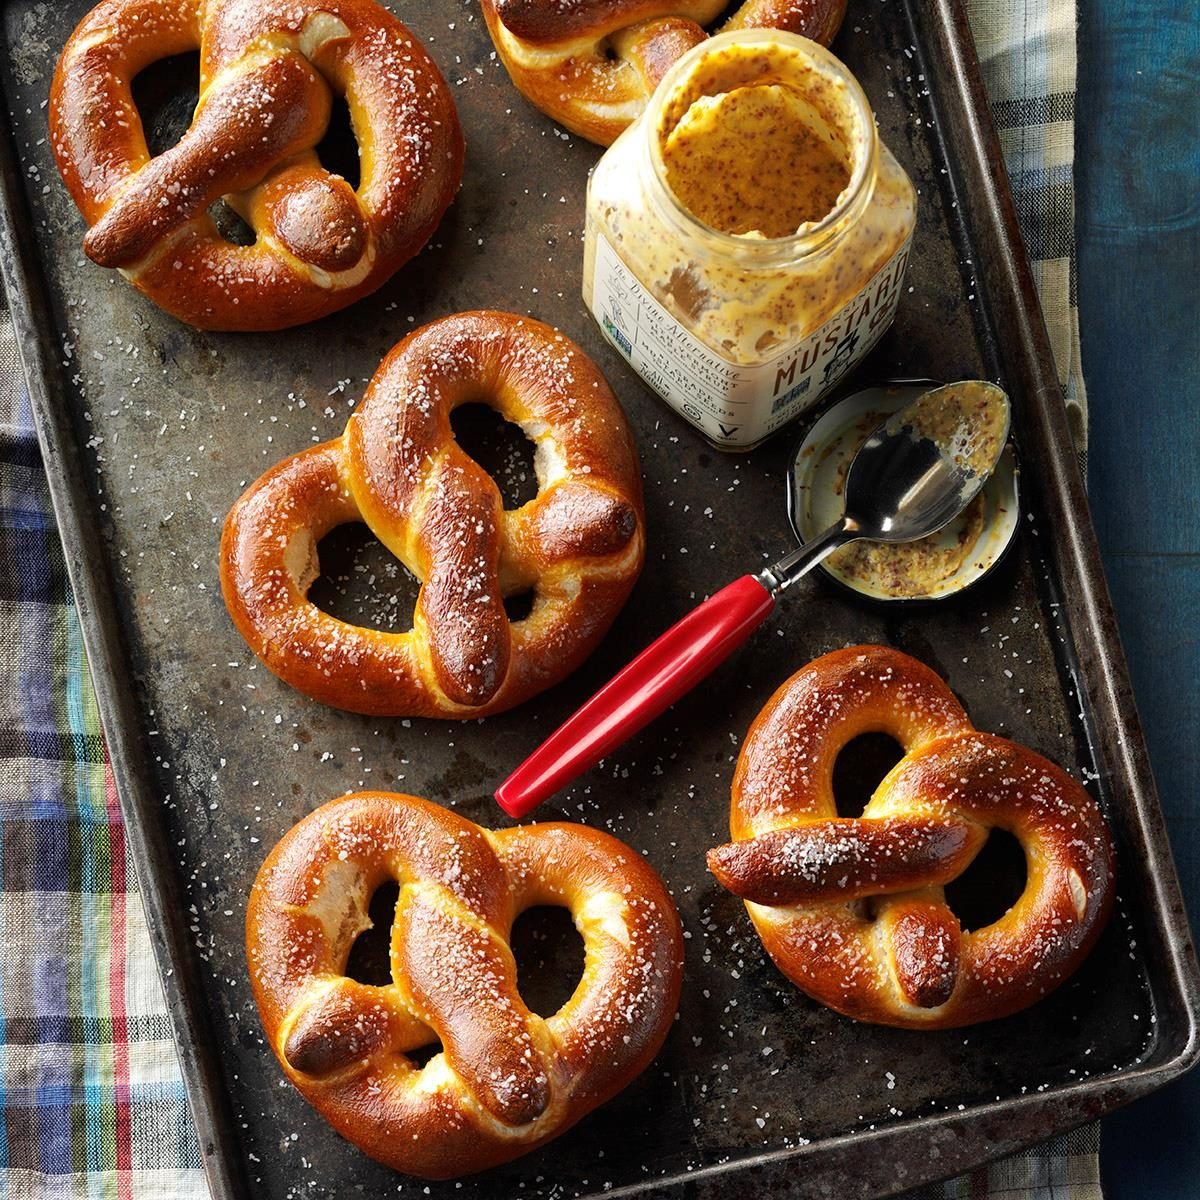 Inspired by the Pretzel Technical Challenge